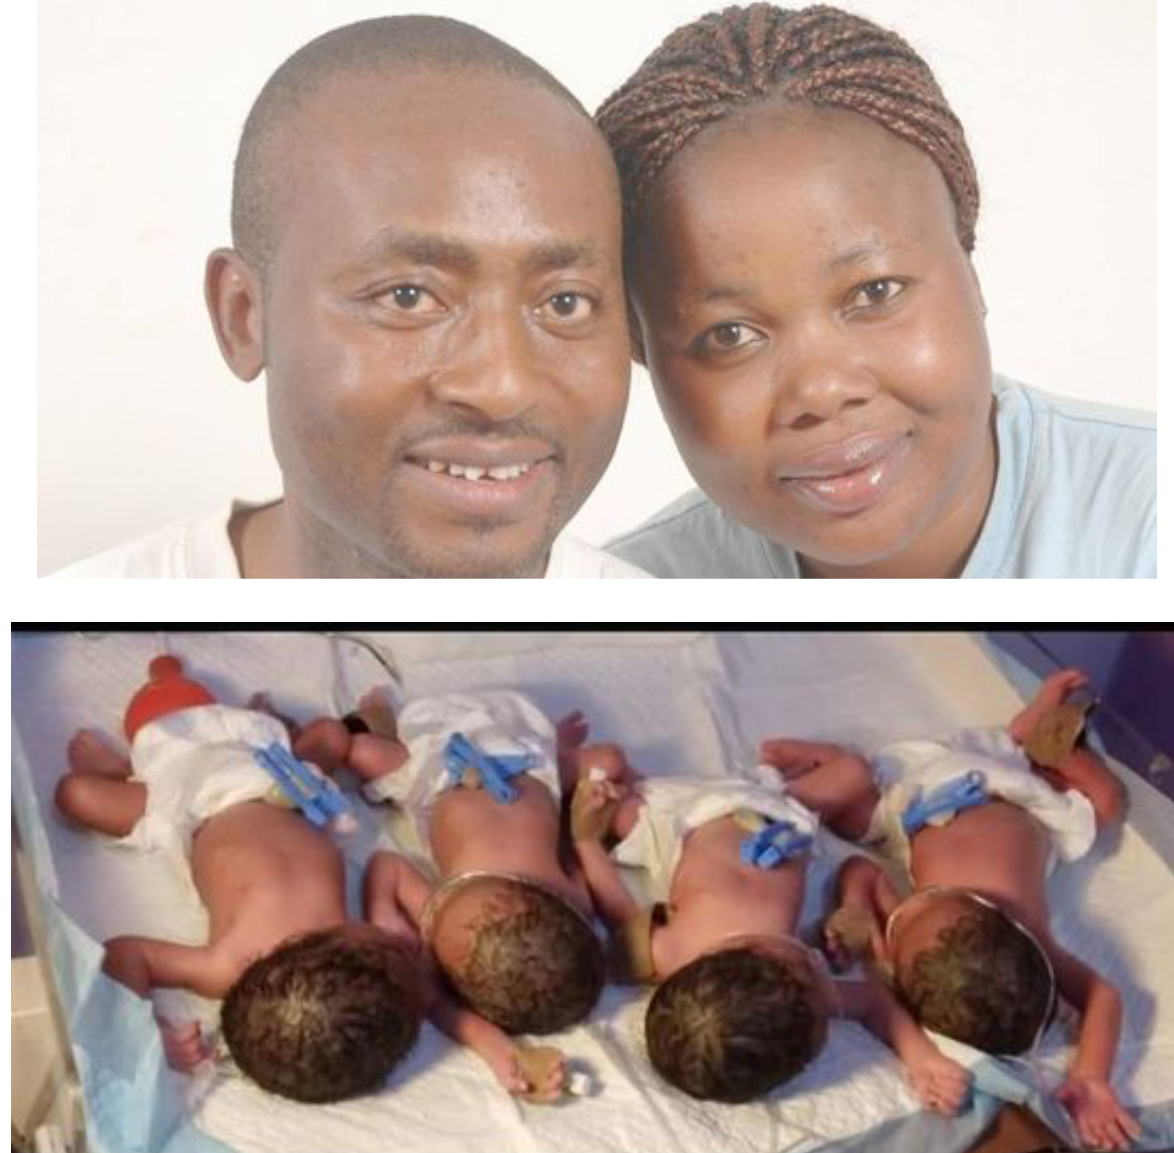 Nigerian woman gives birth to quadruplets after 11 years of marriage